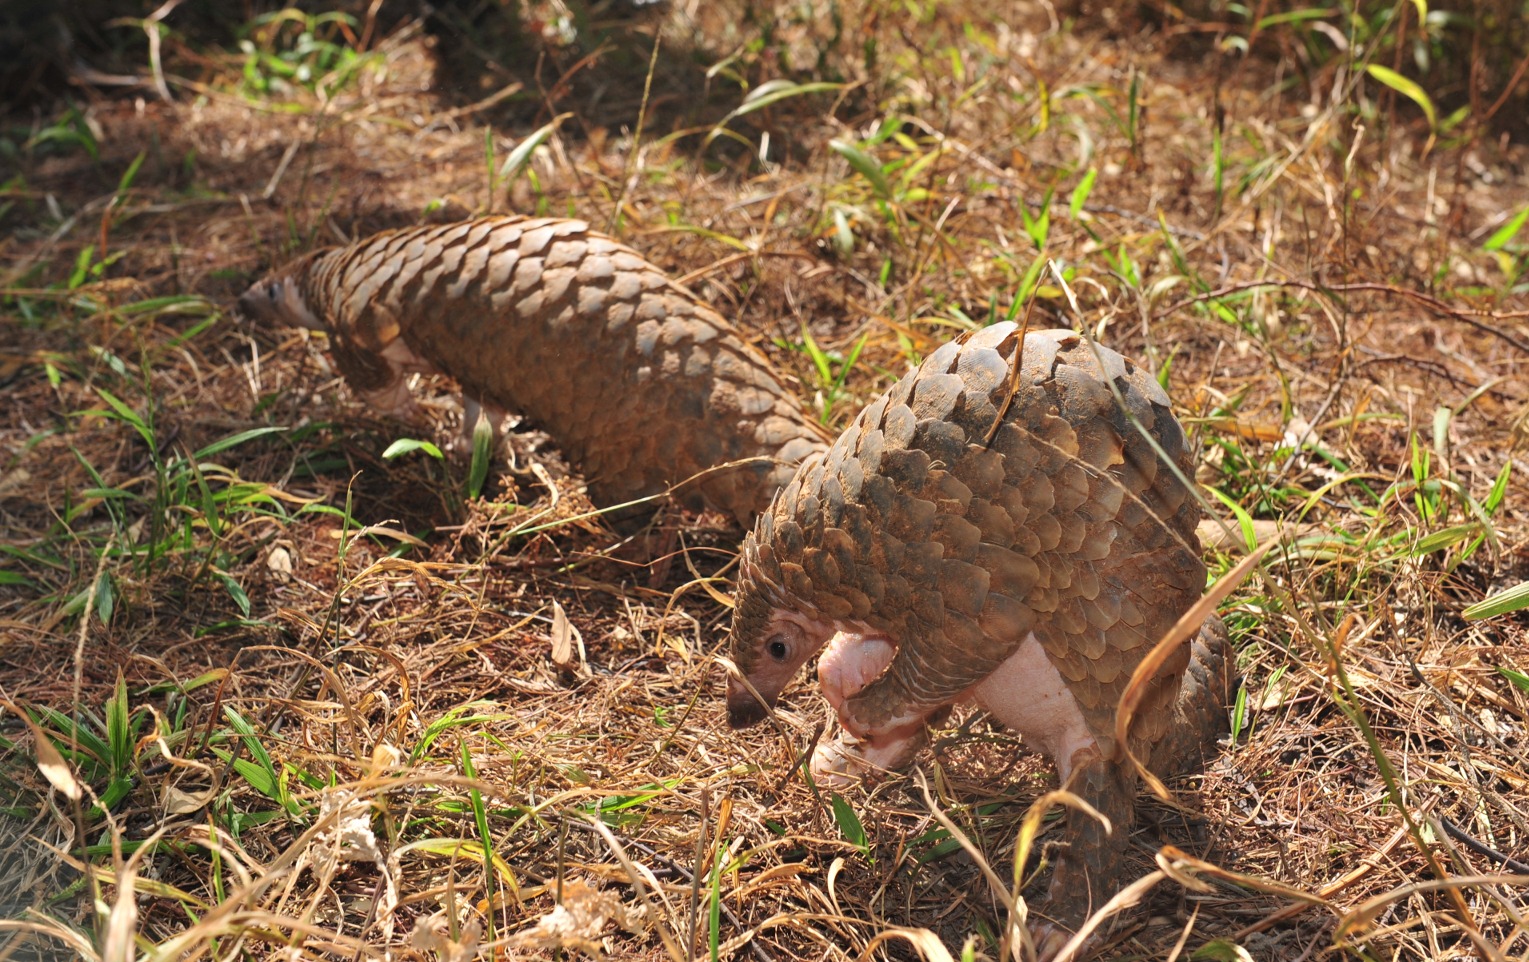 Seizures show scale of pangolin peril | University of Oxford